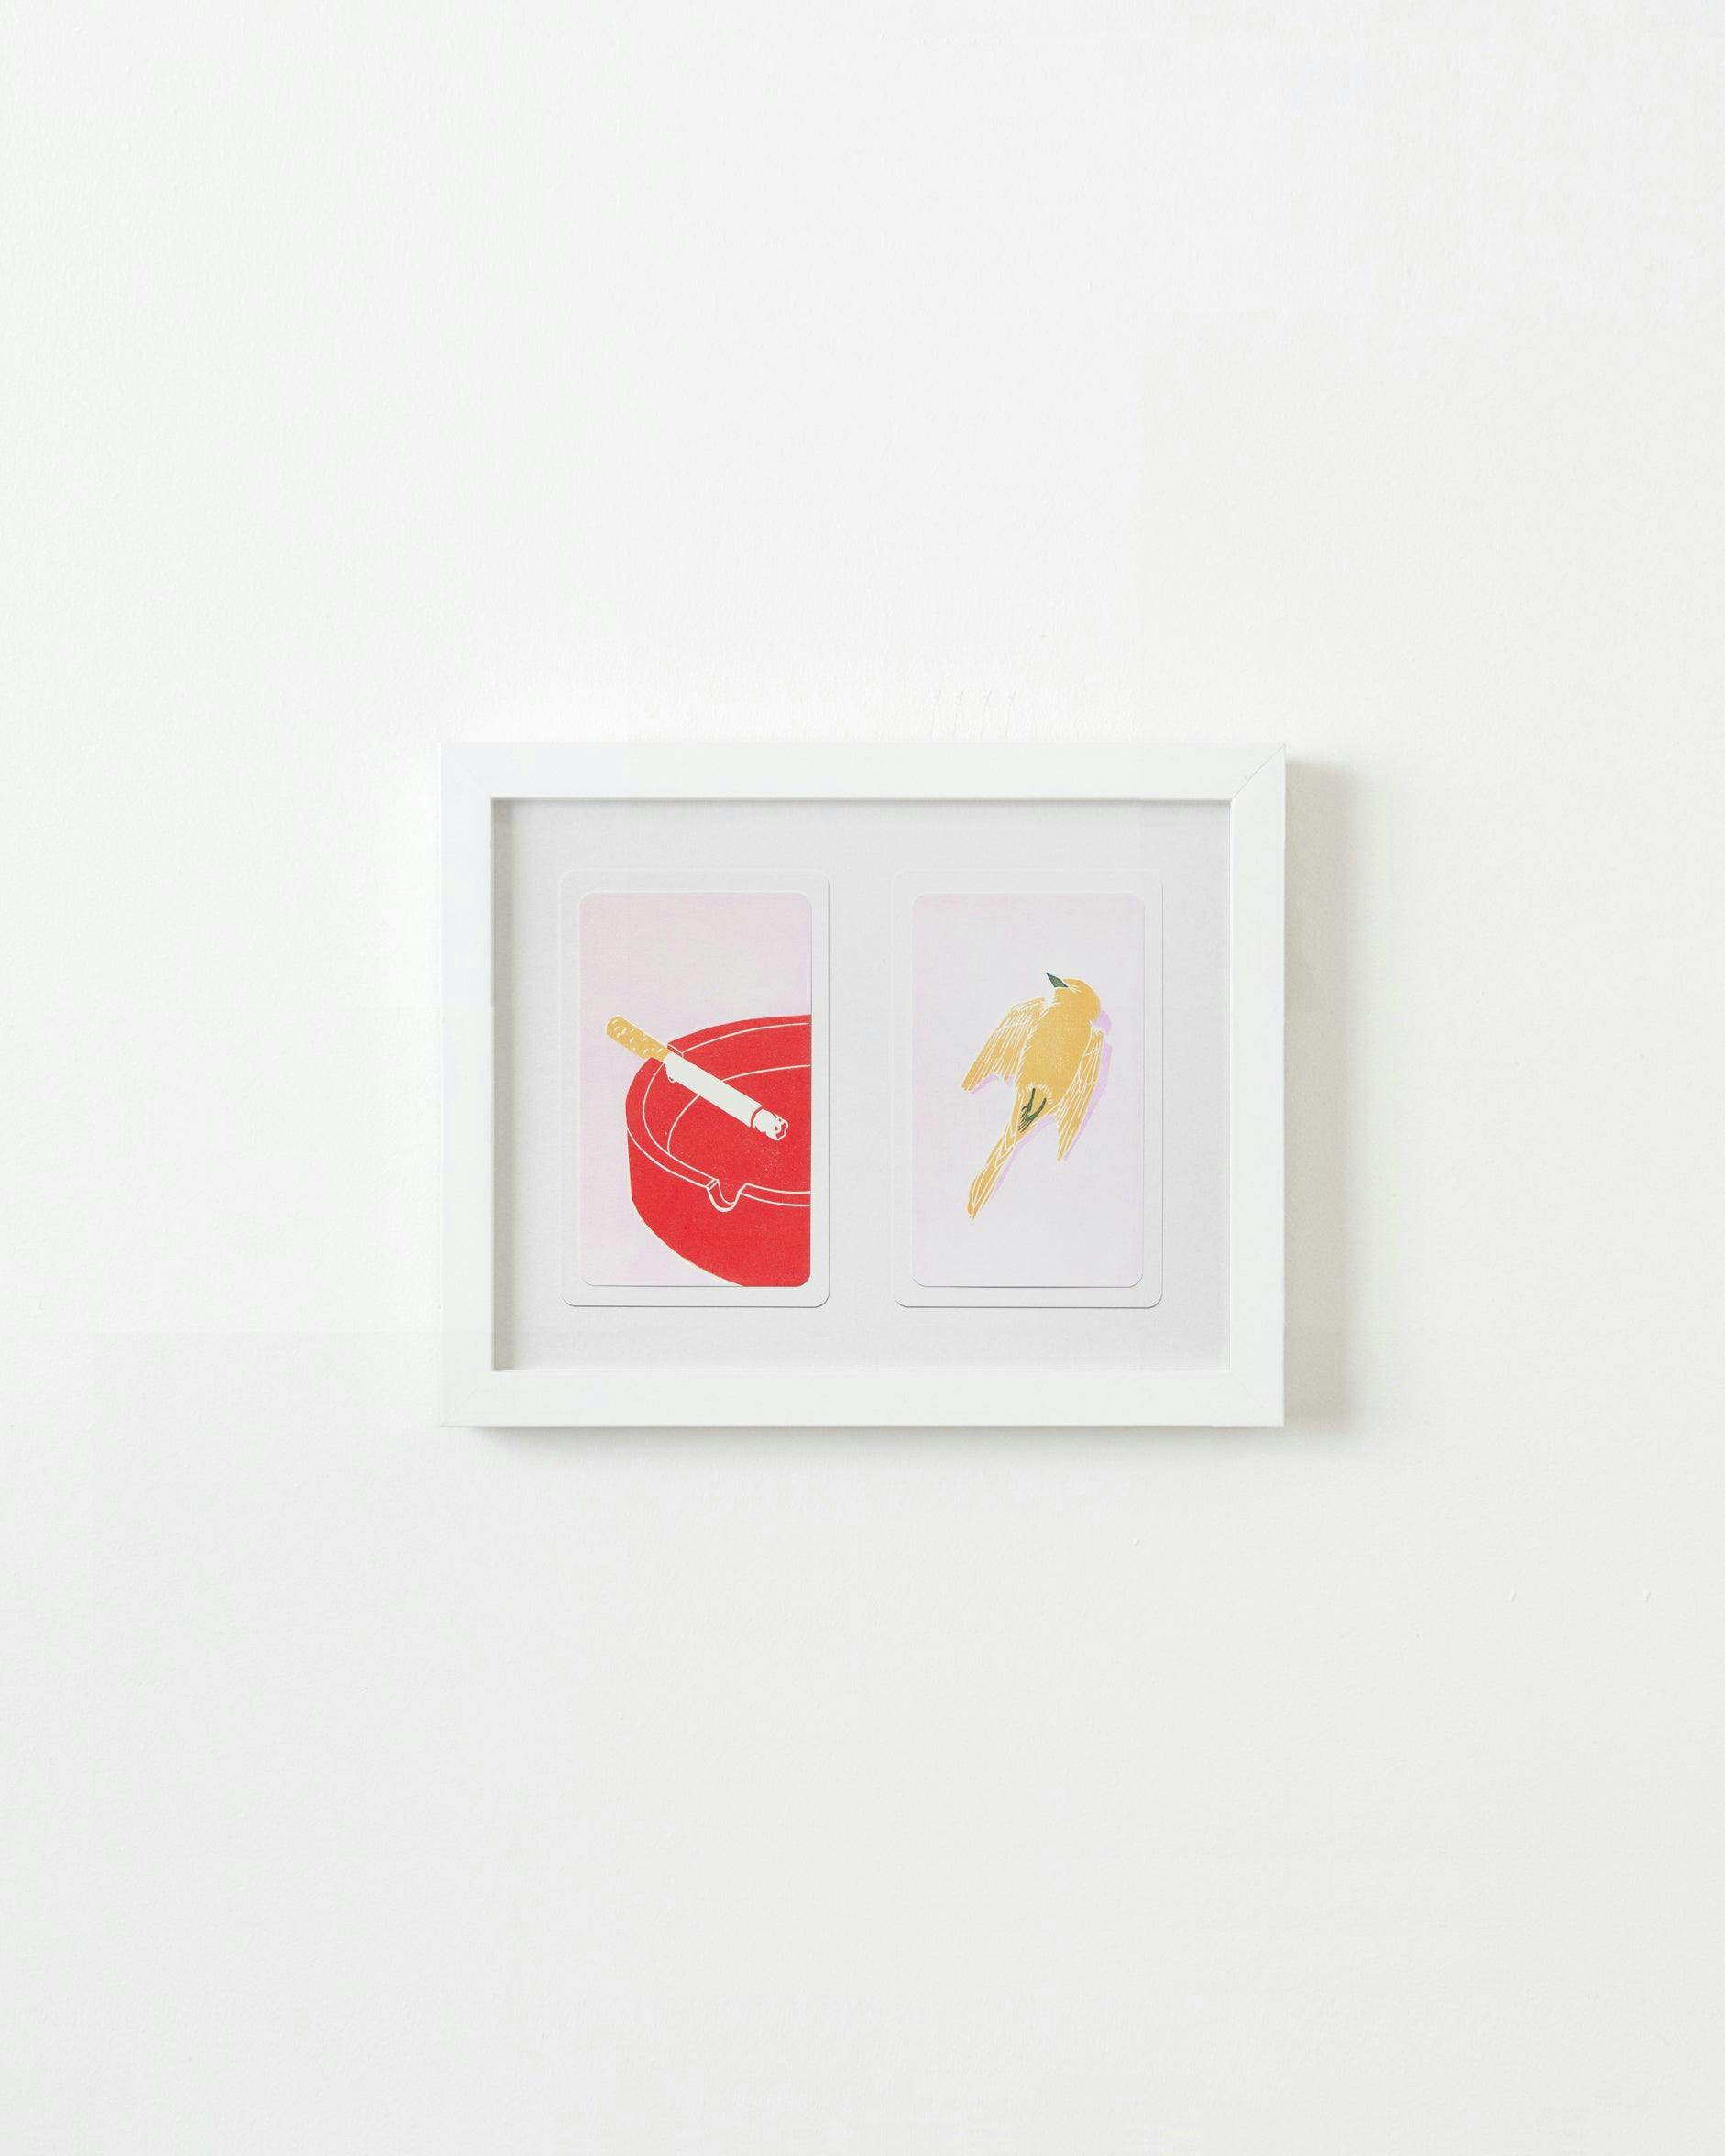 Print by Langdon Graves titled "Bird and Cigarette (Diptych, Home Circle - Vespertine)".